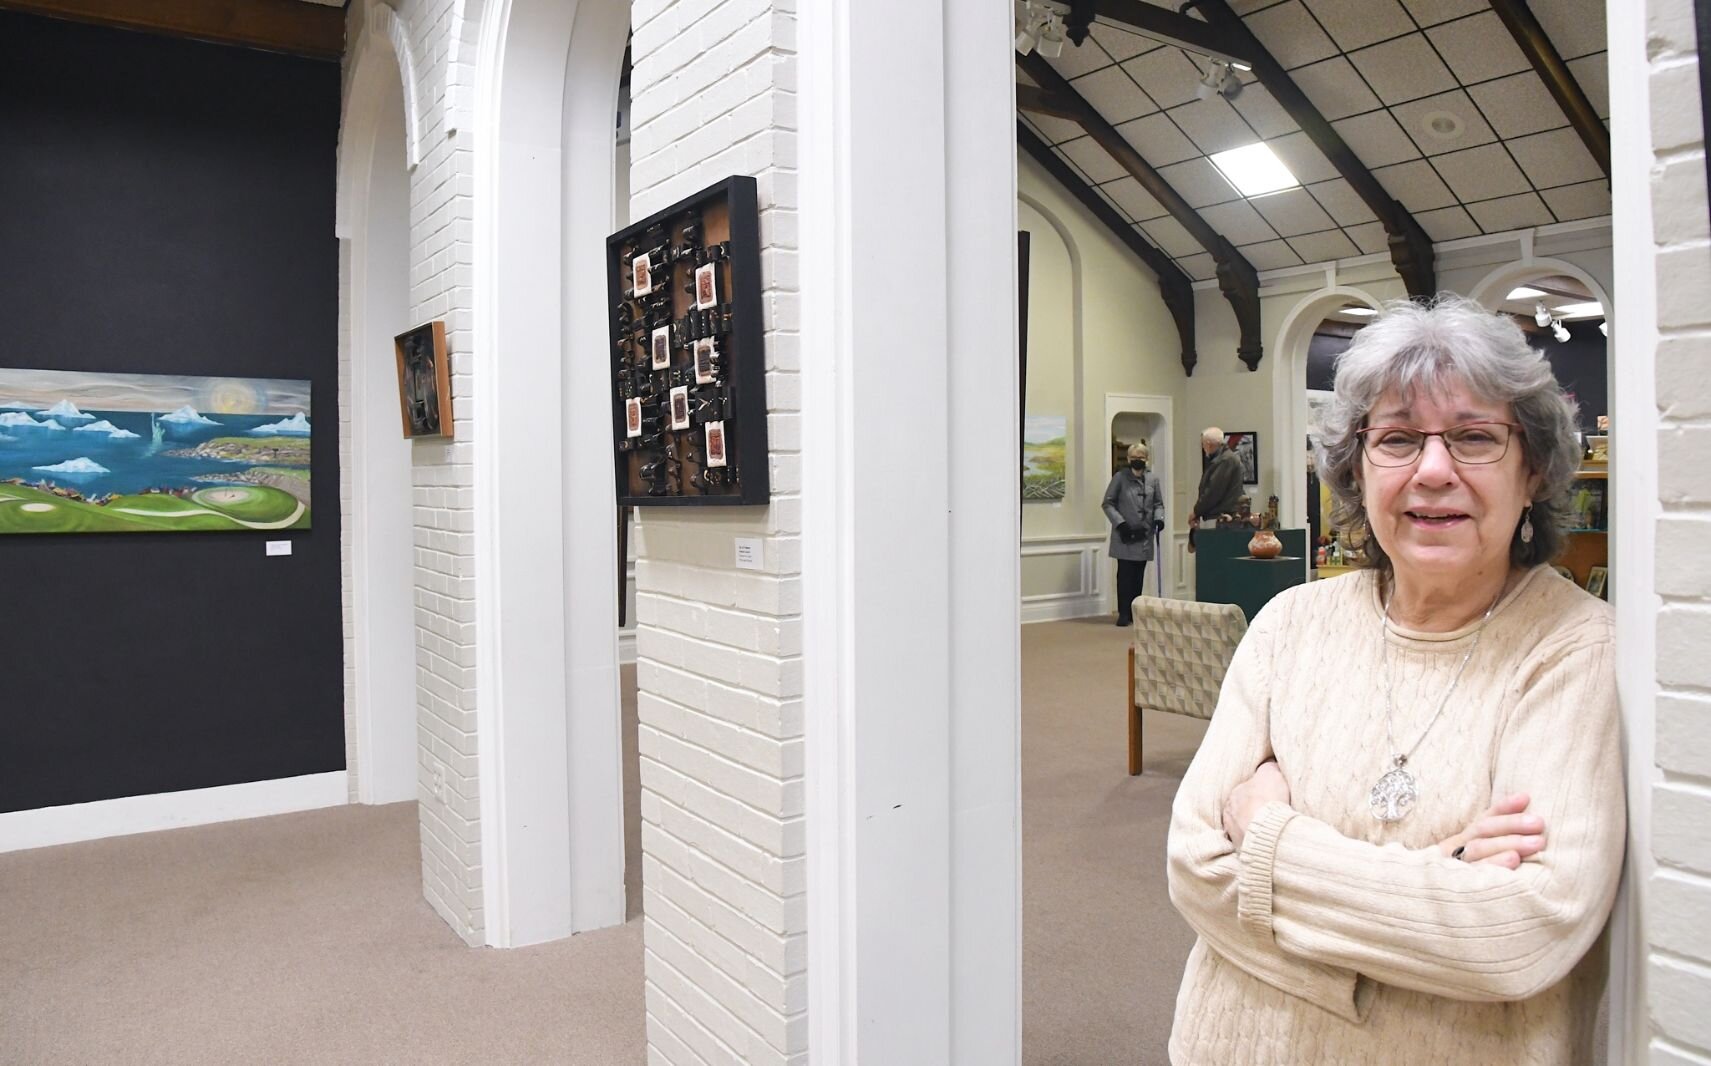 Linda Holderbaum is the executive director of the Art Center of Battle Creek.